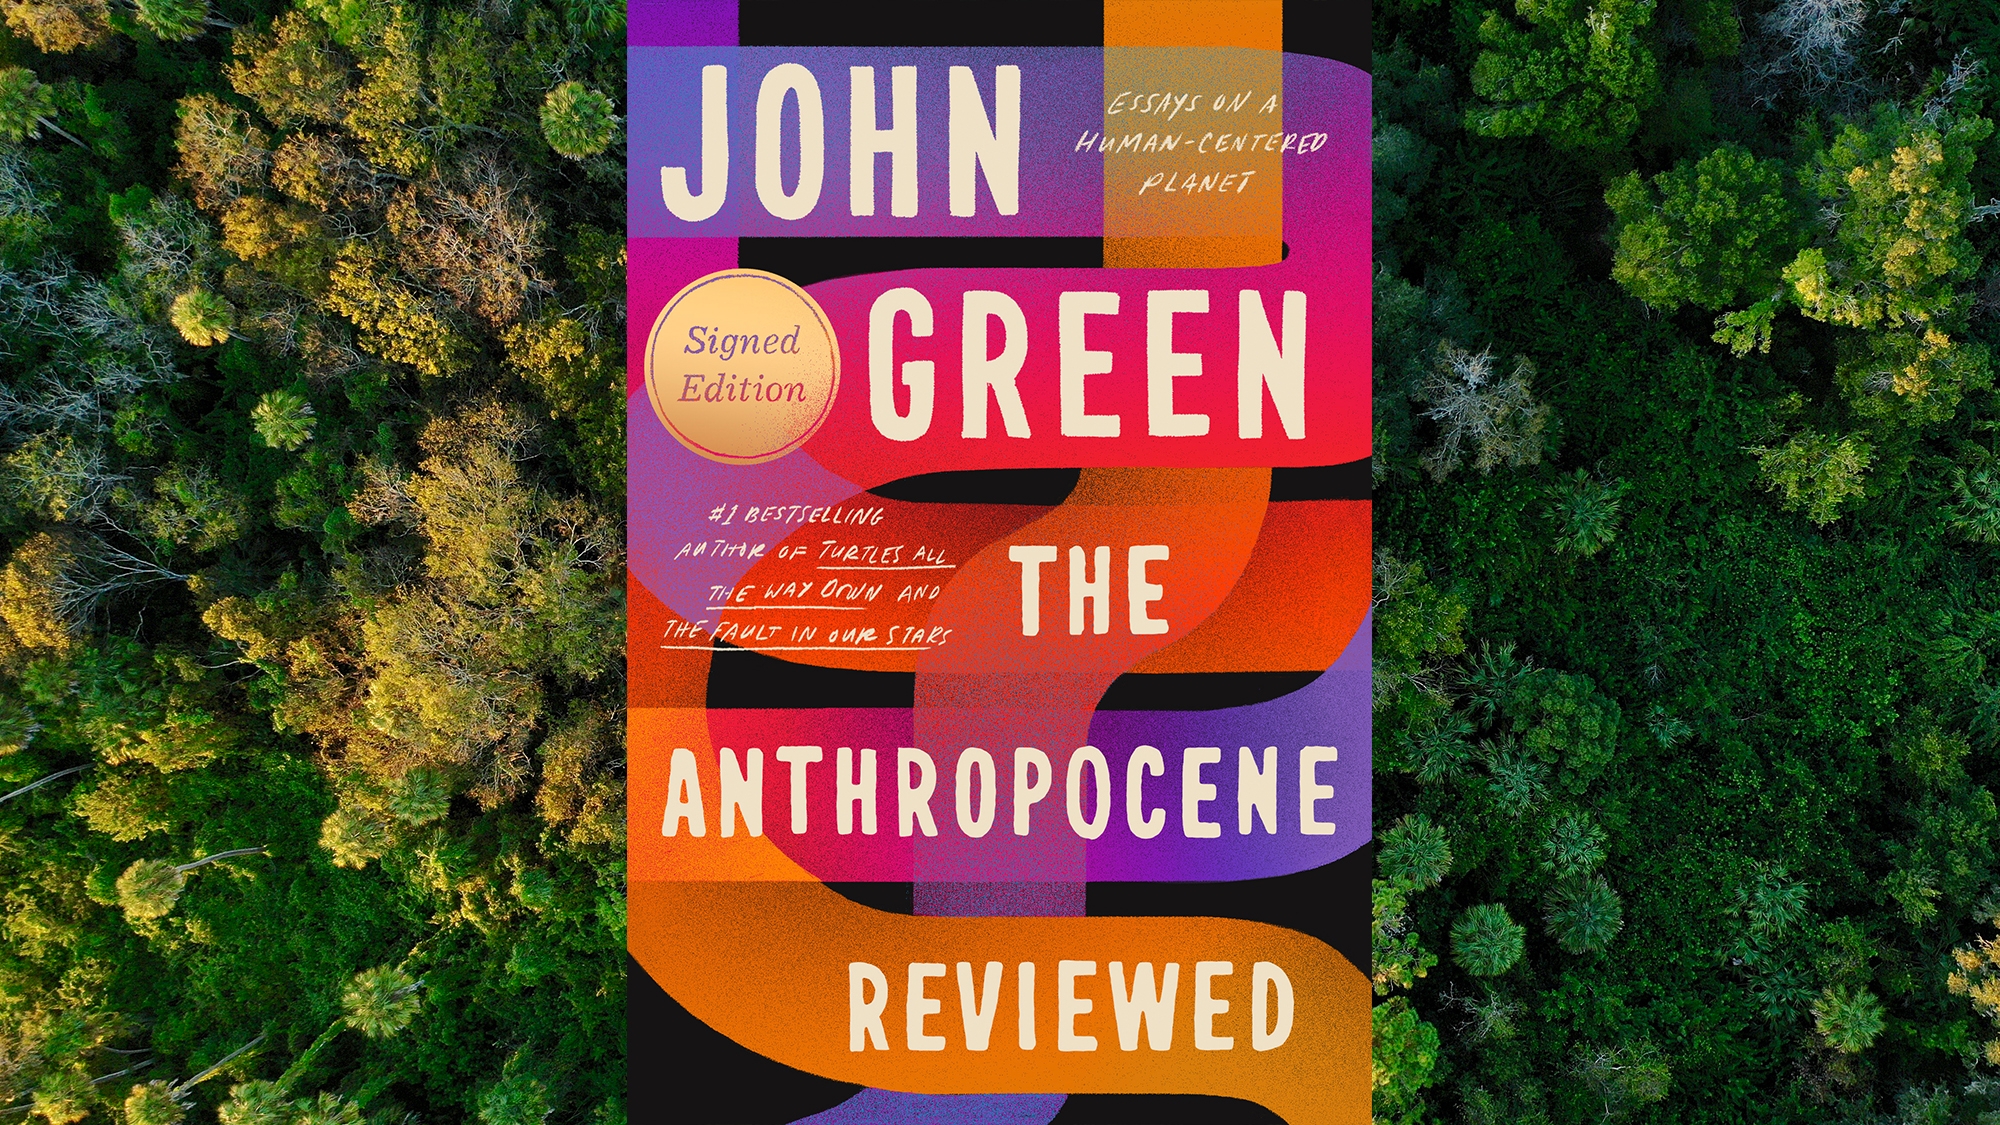 In The Anthropocene Reviewed, John Green appraises everything from plagues to Dr Pepper